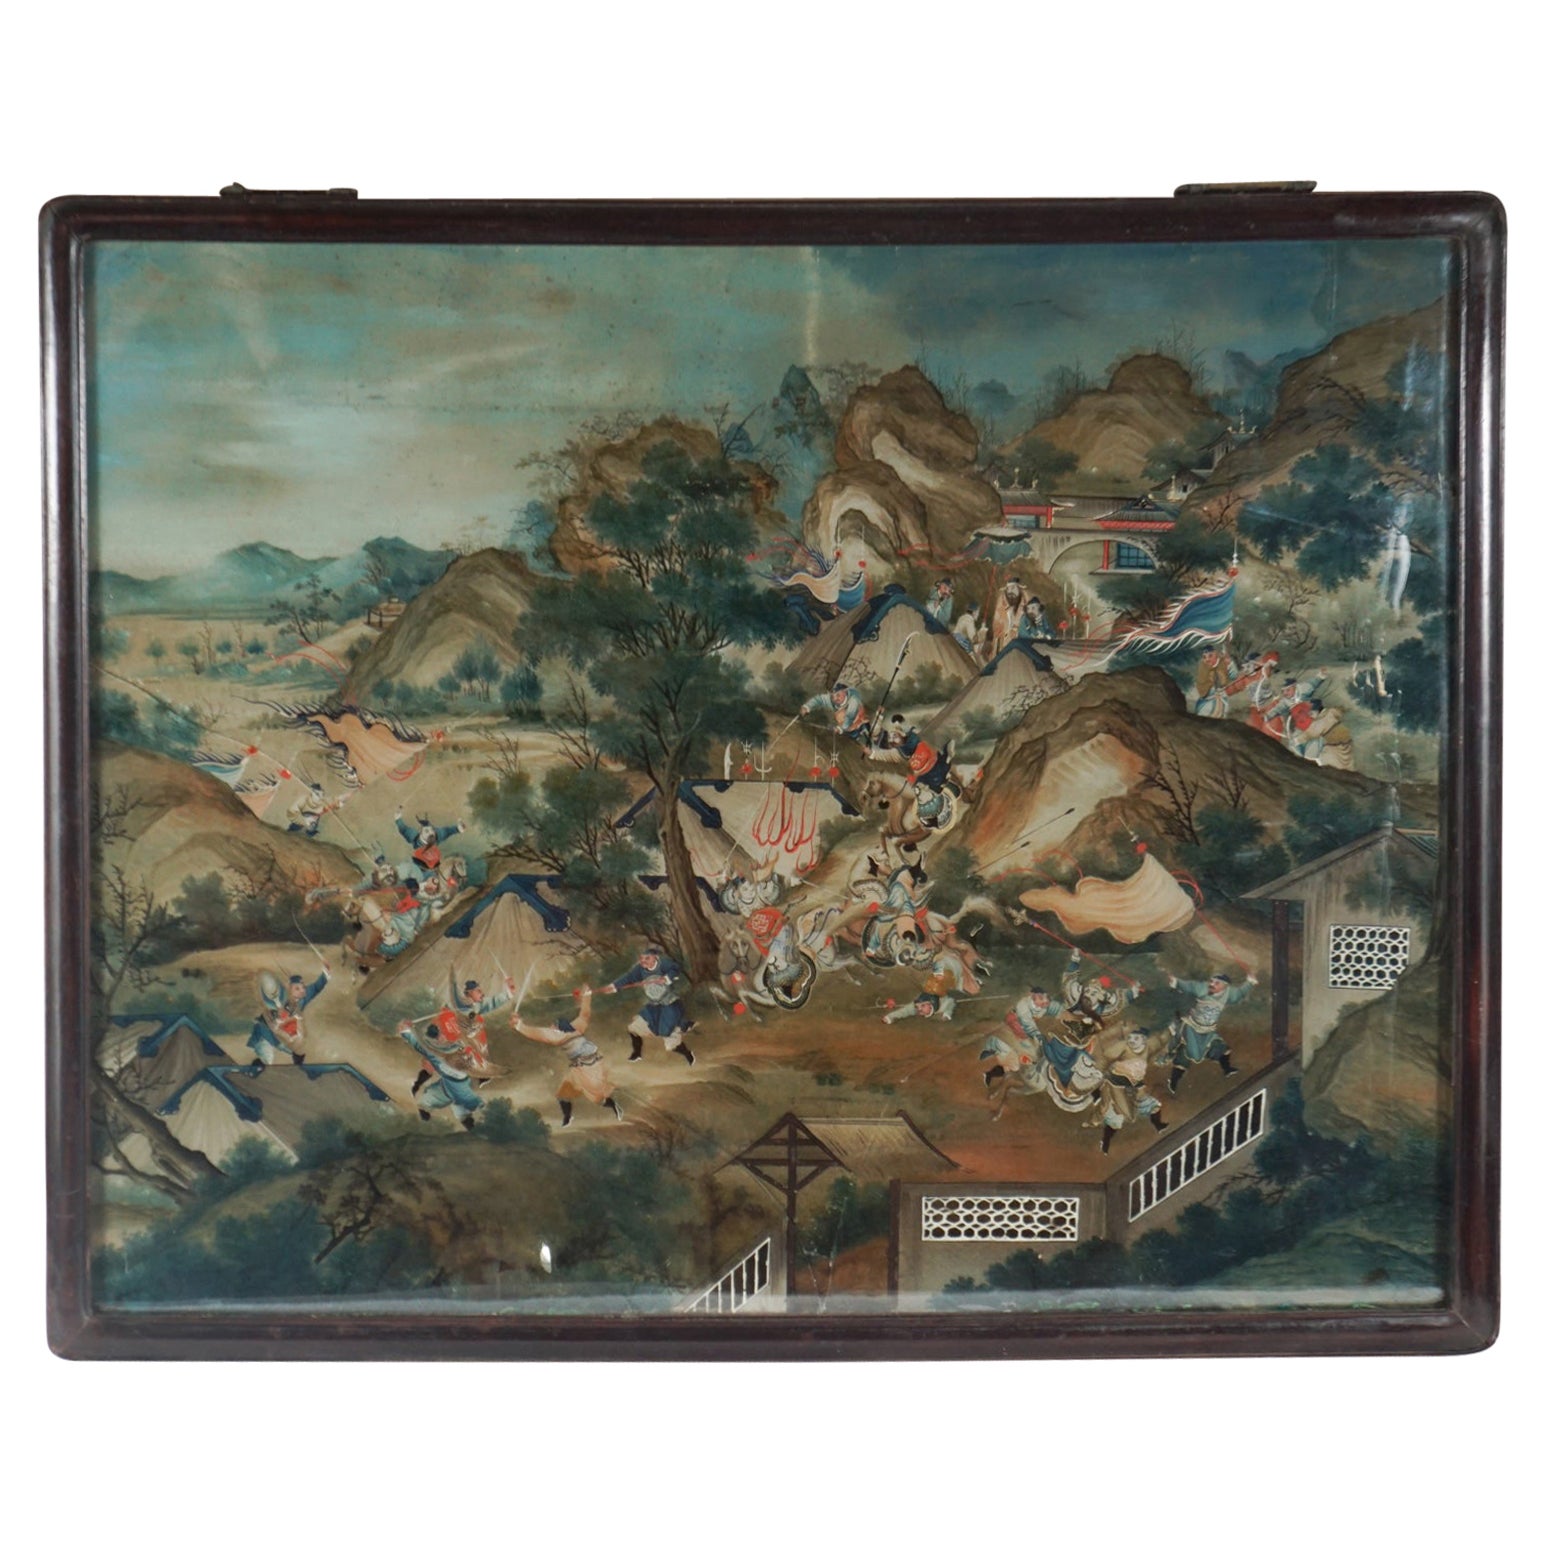 Chinese Late 18th Century Reverse Painting on Glass in its Original Frame